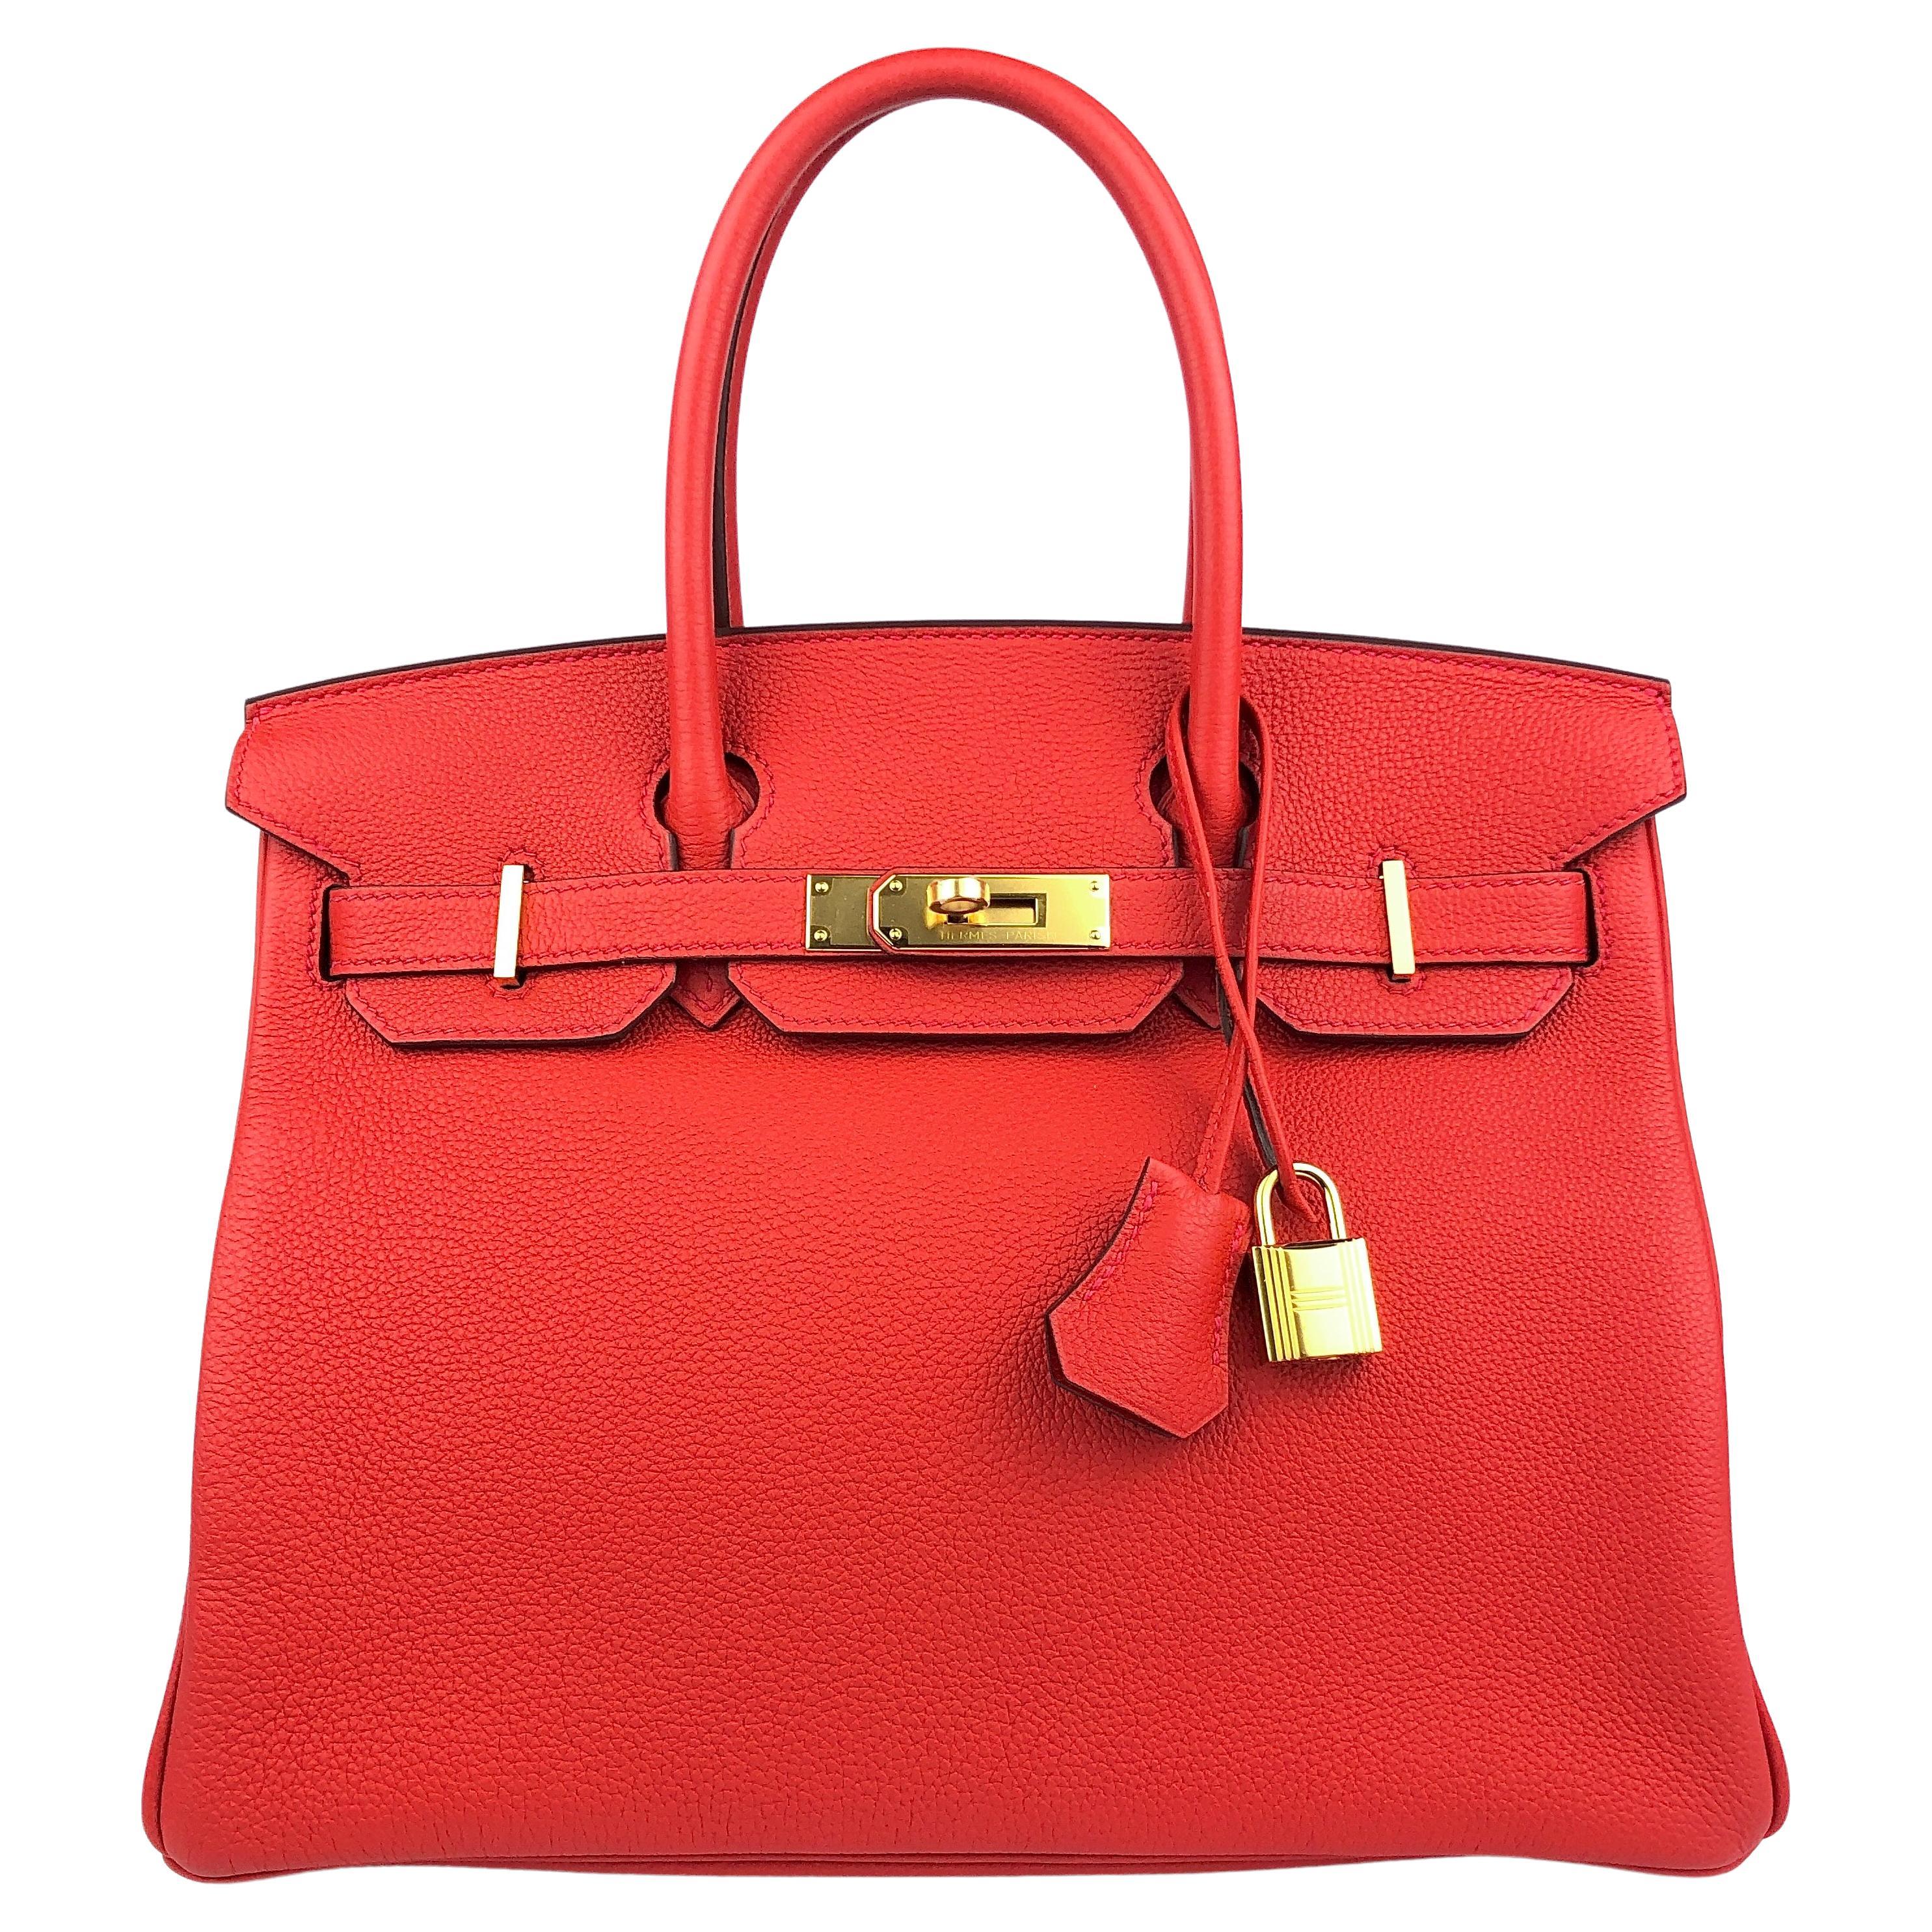 Hermes Birkin 30 Rouge Tomate Red Tomato Togo Leather Gold Hardware 